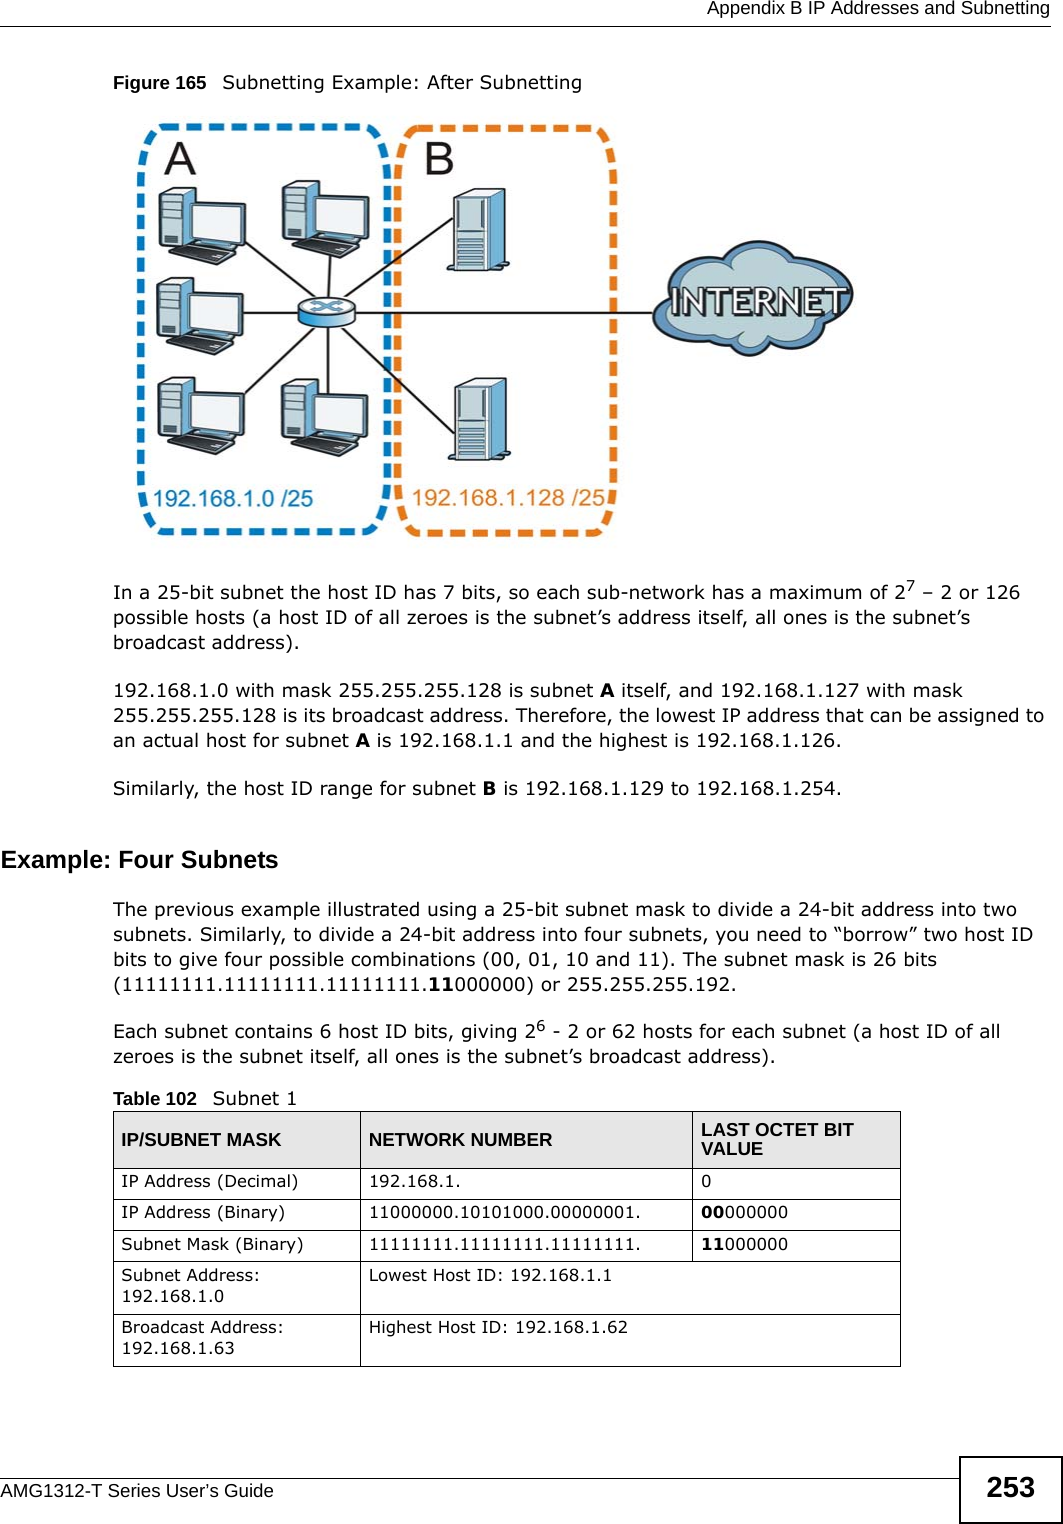  Appendix B IP Addresses and SubnettingAMG1312-T Series User’s Guide 253Figure 165   Subnetting Example: After SubnettingIn a 25-bit subnet the host ID has 7 bits, so each sub-network has a maximum of 27 – 2 or 126 possible hosts (a host ID of all zeroes is the subnet’s address itself, all ones is the subnet’s broadcast address).192.168.1.0 with mask 255.255.255.128 is subnet A itself, and 192.168.1.127 with mask 255.255.255.128 is its broadcast address. Therefore, the lowest IP address that can be assigned to an actual host for subnet A is 192.168.1.1 and the highest is 192.168.1.126. Similarly, the host ID range for subnet B is 192.168.1.129 to 192.168.1.254.Example: Four Subnets The previous example illustrated using a 25-bit subnet mask to divide a 24-bit address into two subnets. Similarly, to divide a 24-bit address into four subnets, you need to “borrow” two host ID bits to give four possible combinations (00, 01, 10 and 11). The subnet mask is 26 bits (11111111.11111111.11111111.11000000) or 255.255.255.192. Each subnet contains 6 host ID bits, giving 26 - 2 or 62 hosts for each subnet (a host ID of all zeroes is the subnet itself, all ones is the subnet’s broadcast address). Table 102   Subnet 1IP/SUBNET MASK NETWORK NUMBER LAST OCTET BIT VALUEIP Address (Decimal) 192.168.1. 0IP Address (Binary) 11000000.10101000.00000001. 00000000Subnet Mask (Binary) 11111111.11111111.11111111. 11000000Subnet Address: 192.168.1.0Lowest Host ID: 192.168.1.1Broadcast Address: 192.168.1.63Highest Host ID: 192.168.1.62